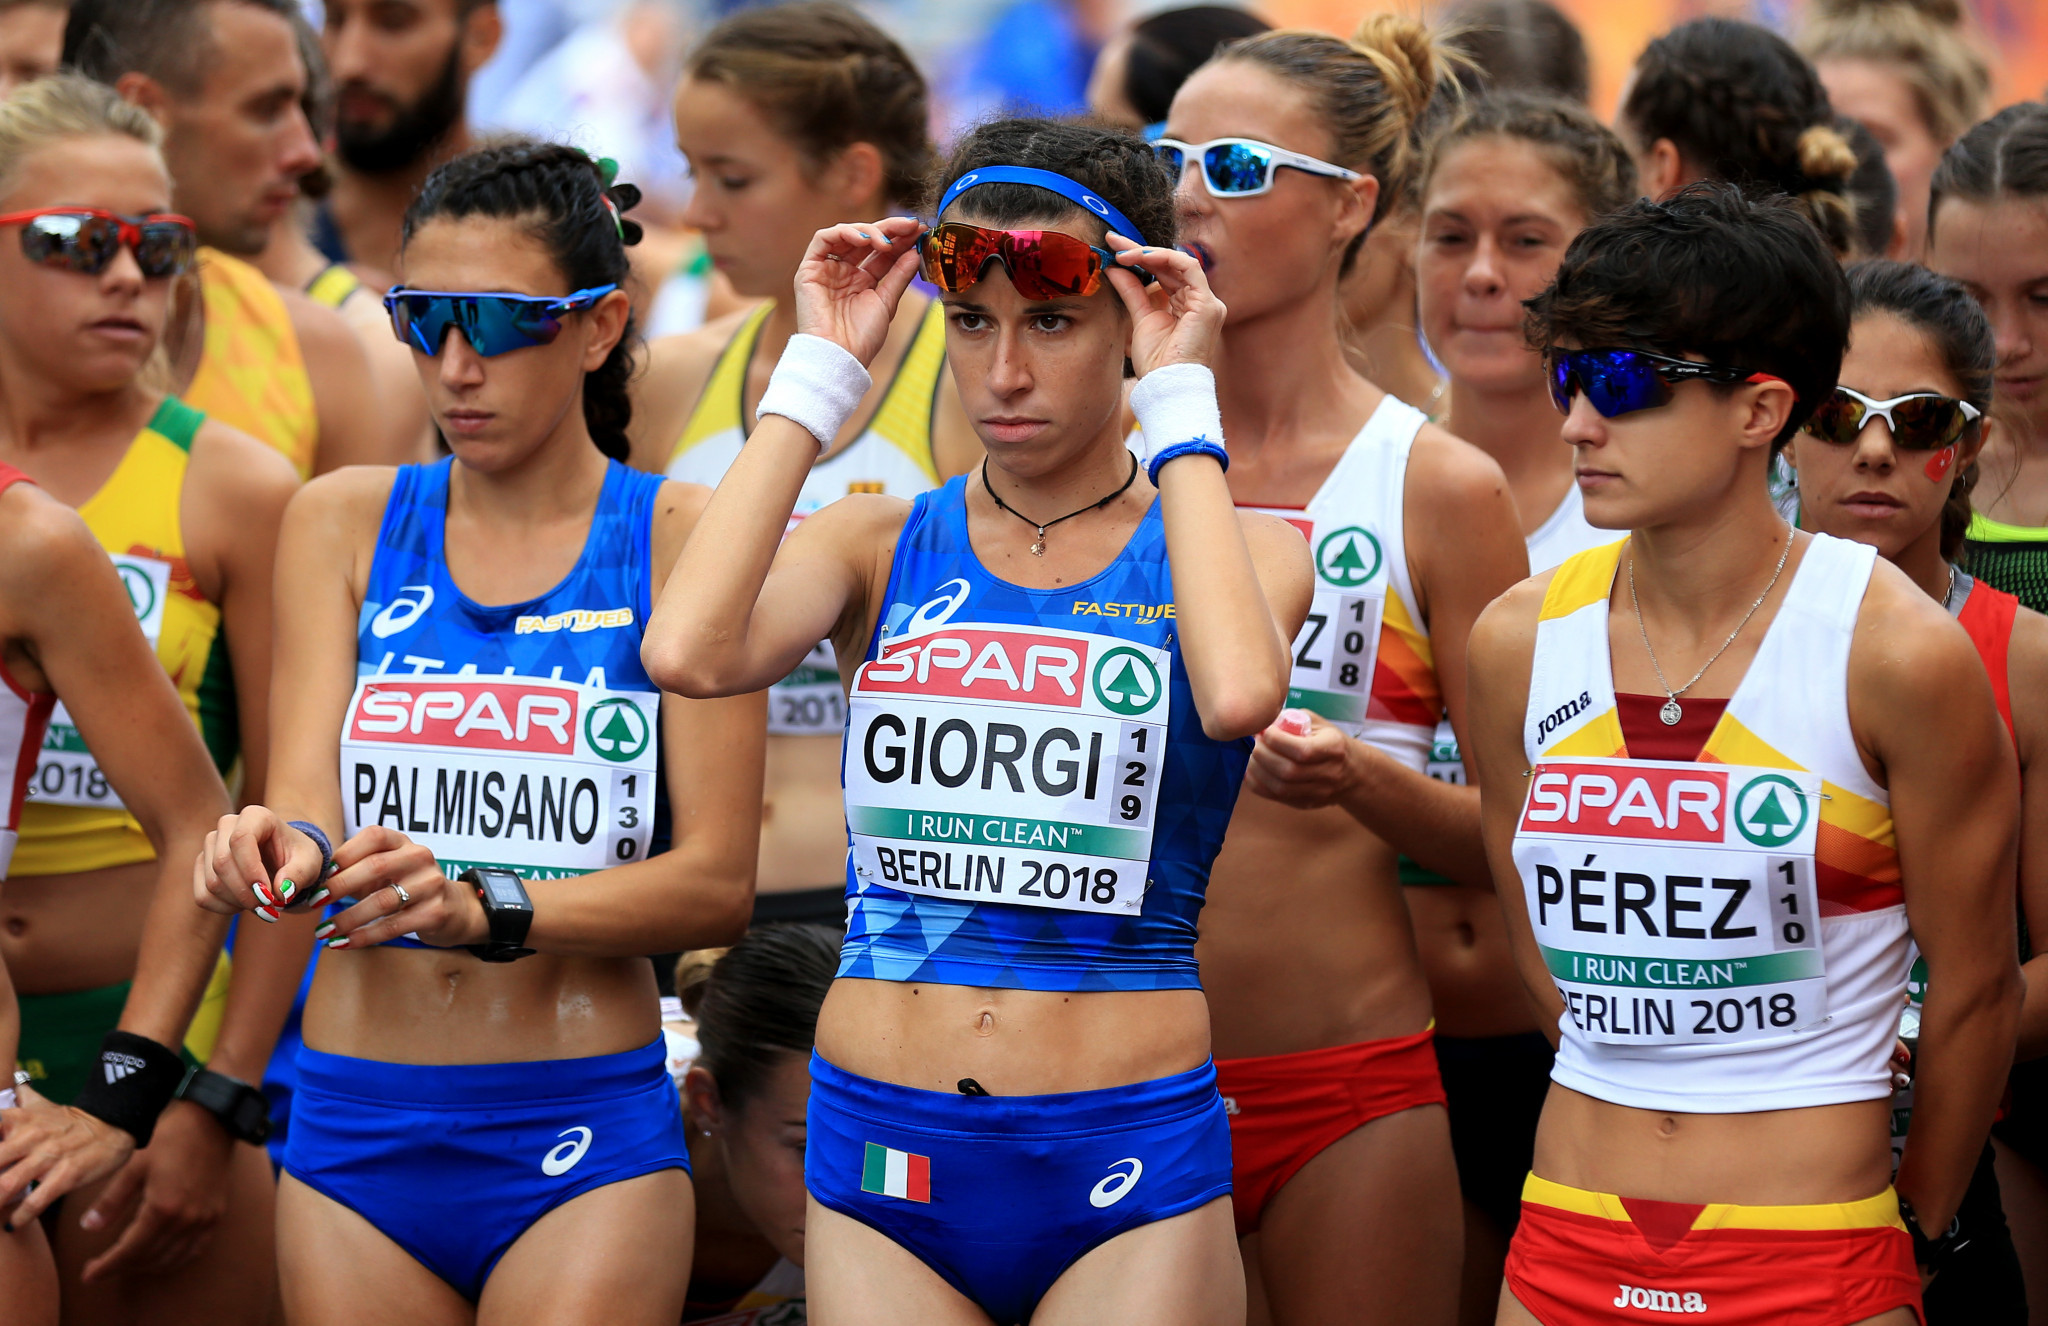 Italy's Eleonora Giorgi has her eyes on a 50km victory at the European Race Walking Cup in Lithuania tomorrow ©Getty Images